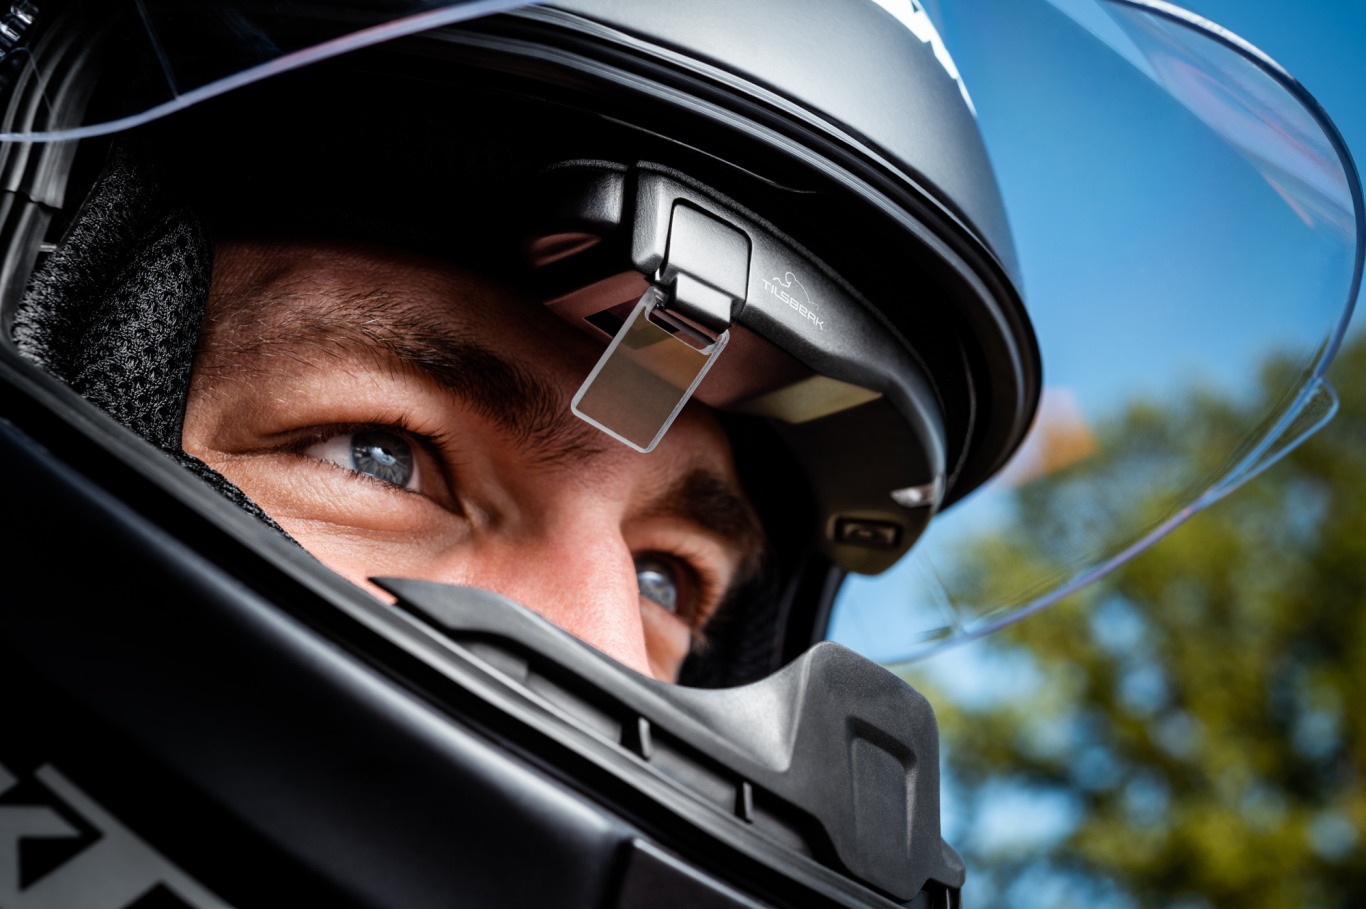 The TILSBERK Head-Up Display is made for all motorcyclists